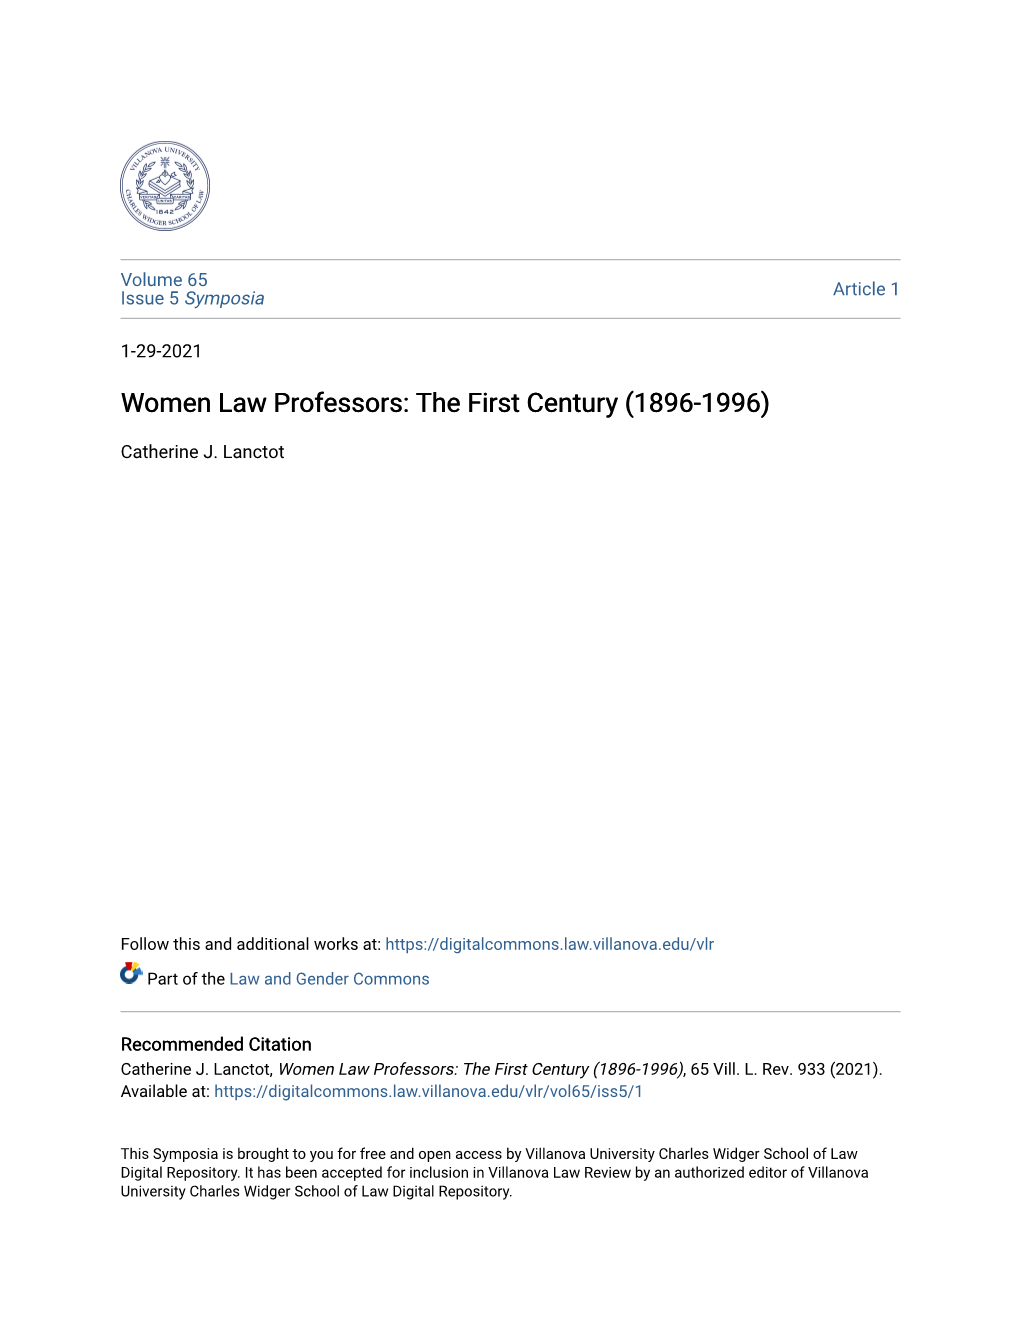 Women Law Professors: the First Century (1896-1996)